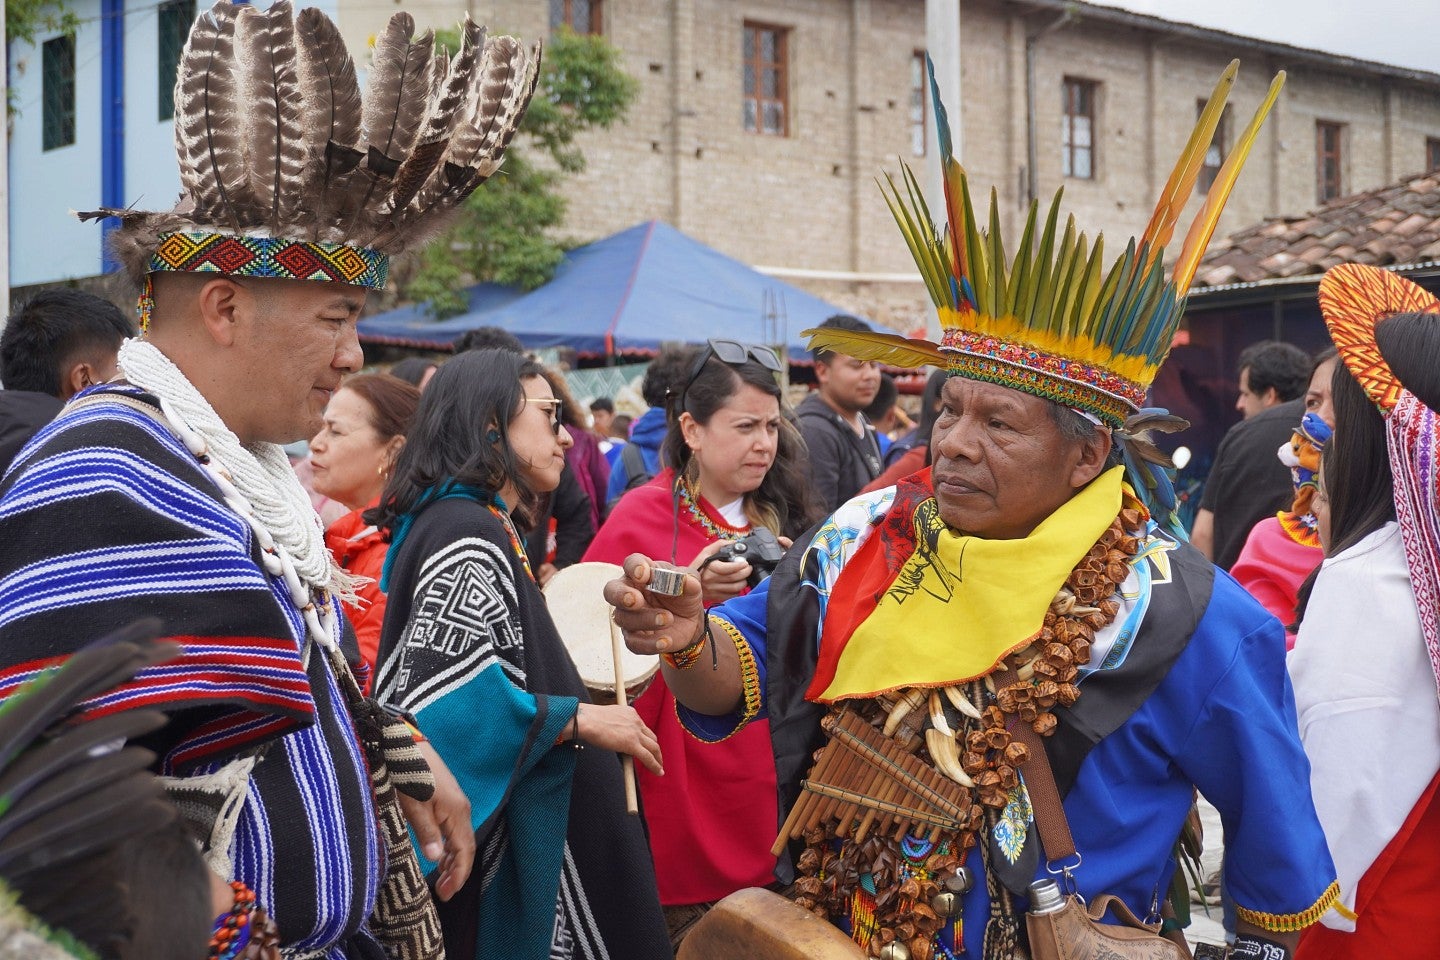 A shaman offers another a shot of aguardiente, a strong Colombian liquor, a tradition during the Bëtsknaté celebration and a sign of respect and friendship